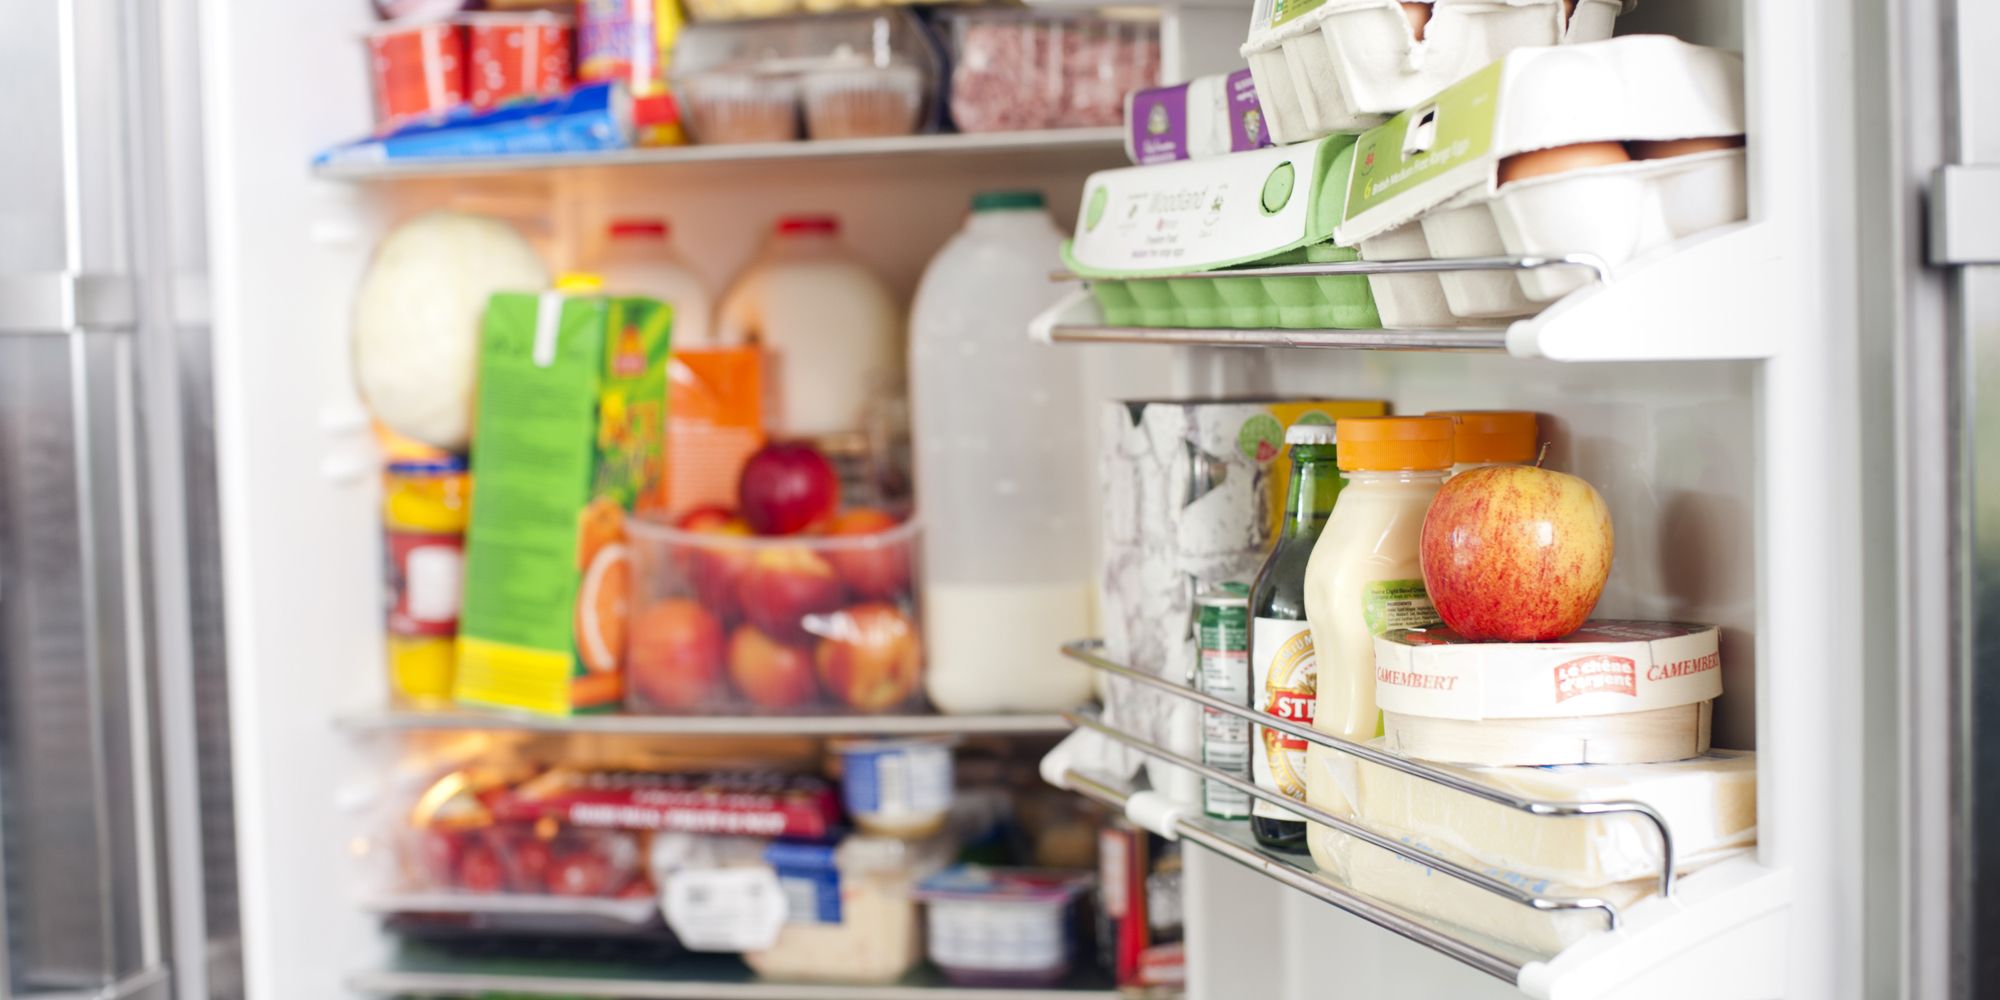 How to Keep Food & Groceries Fresh While You're Out